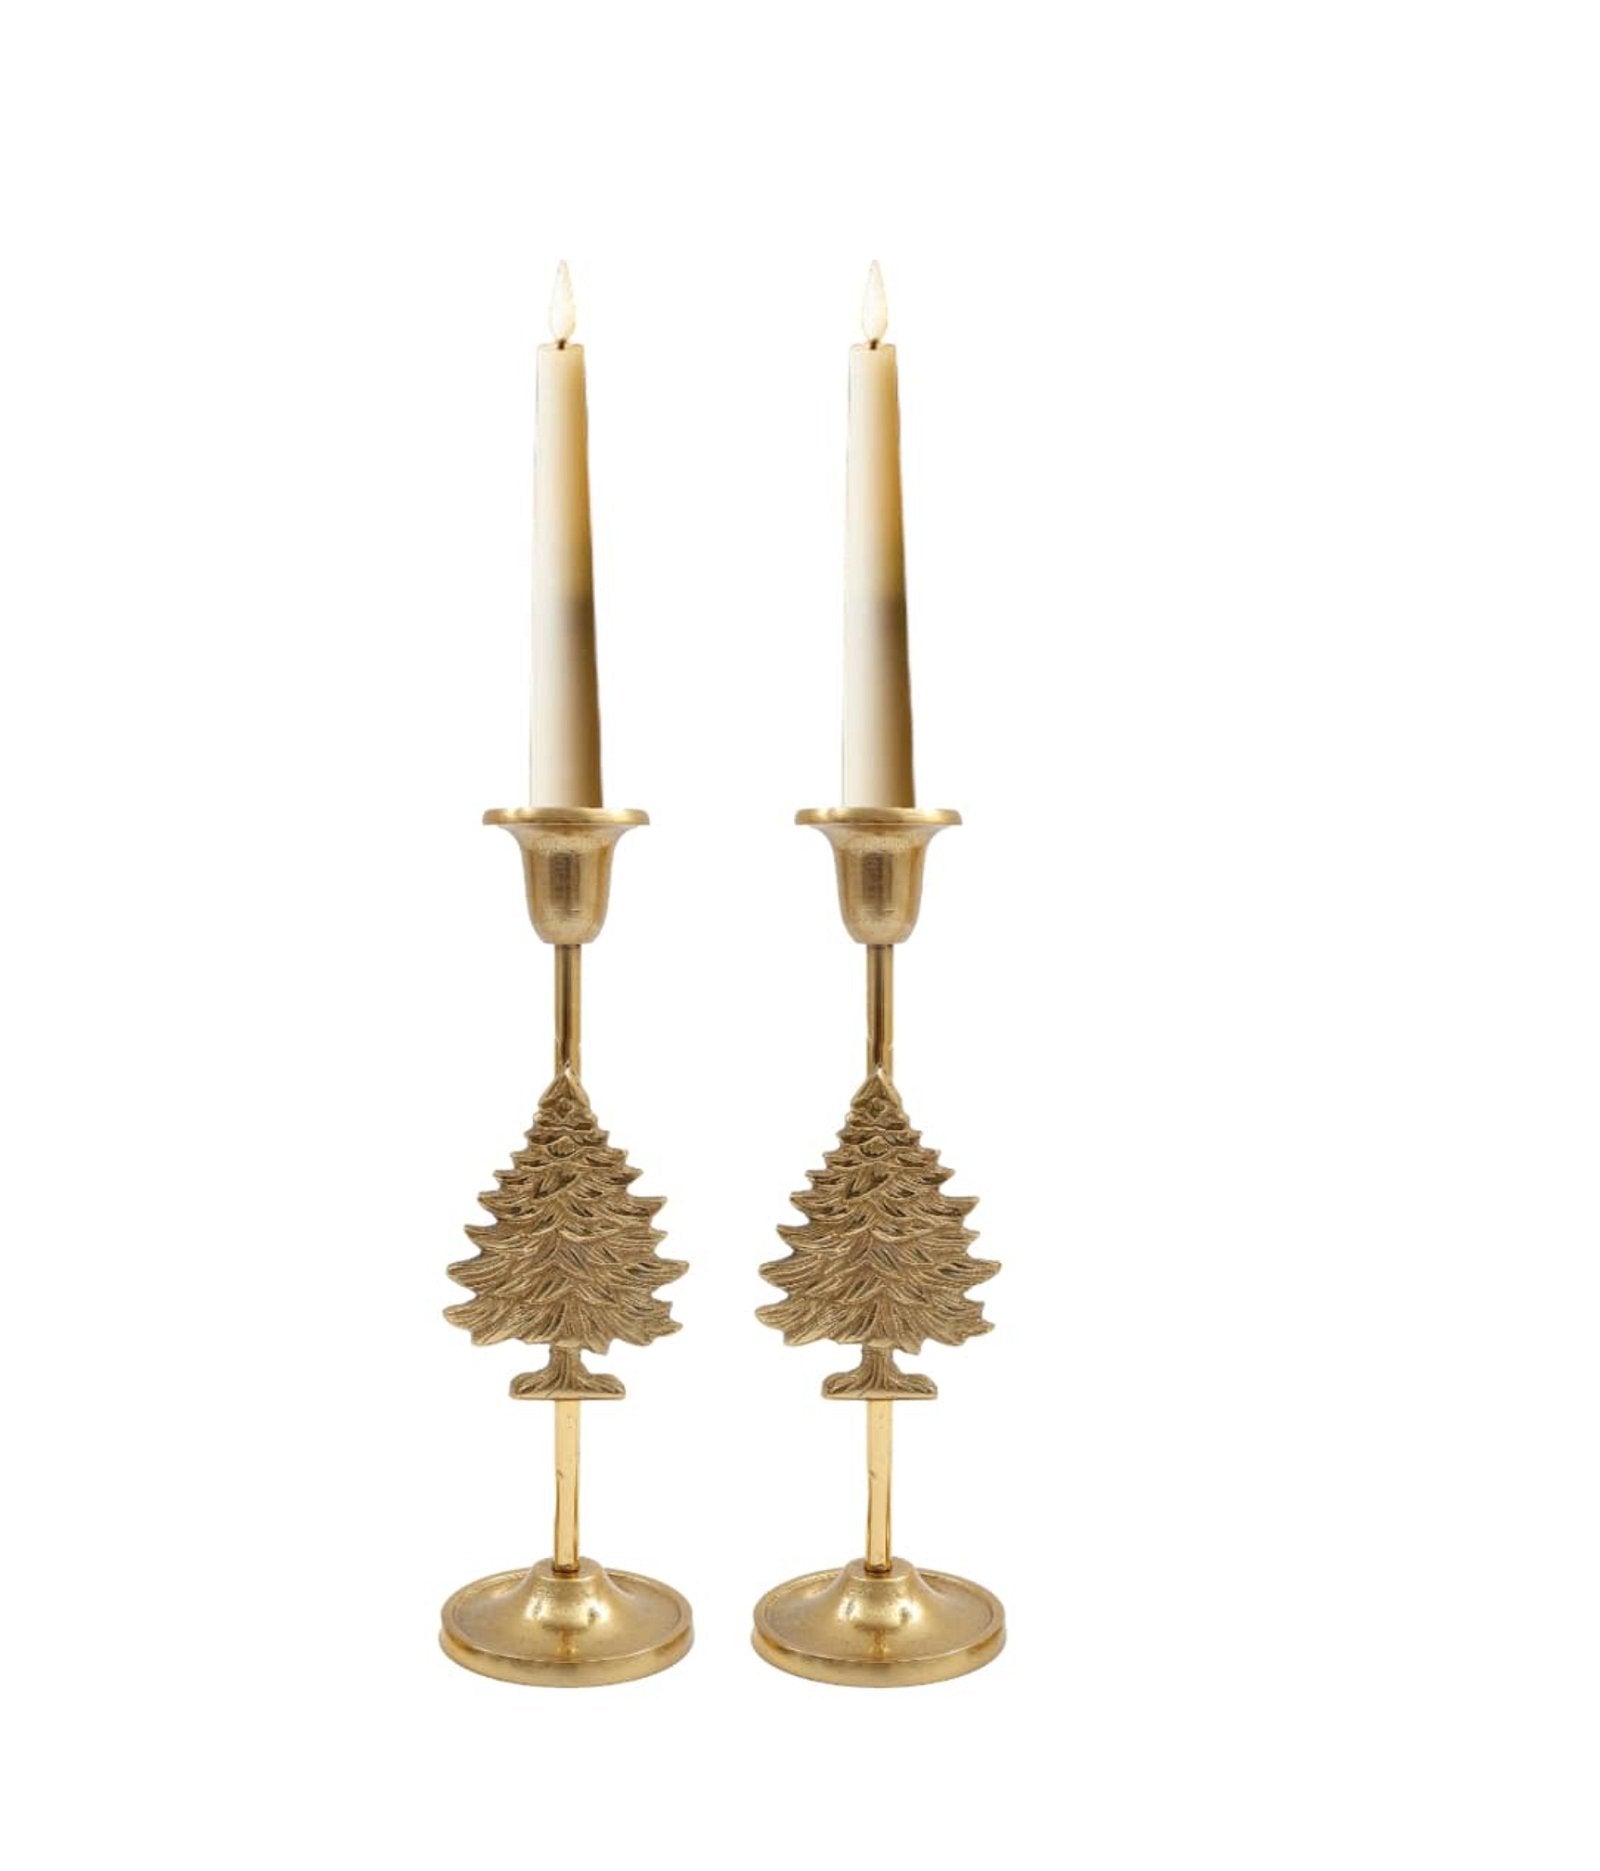 View Gold Christmas Tree Candle Stick Holder information